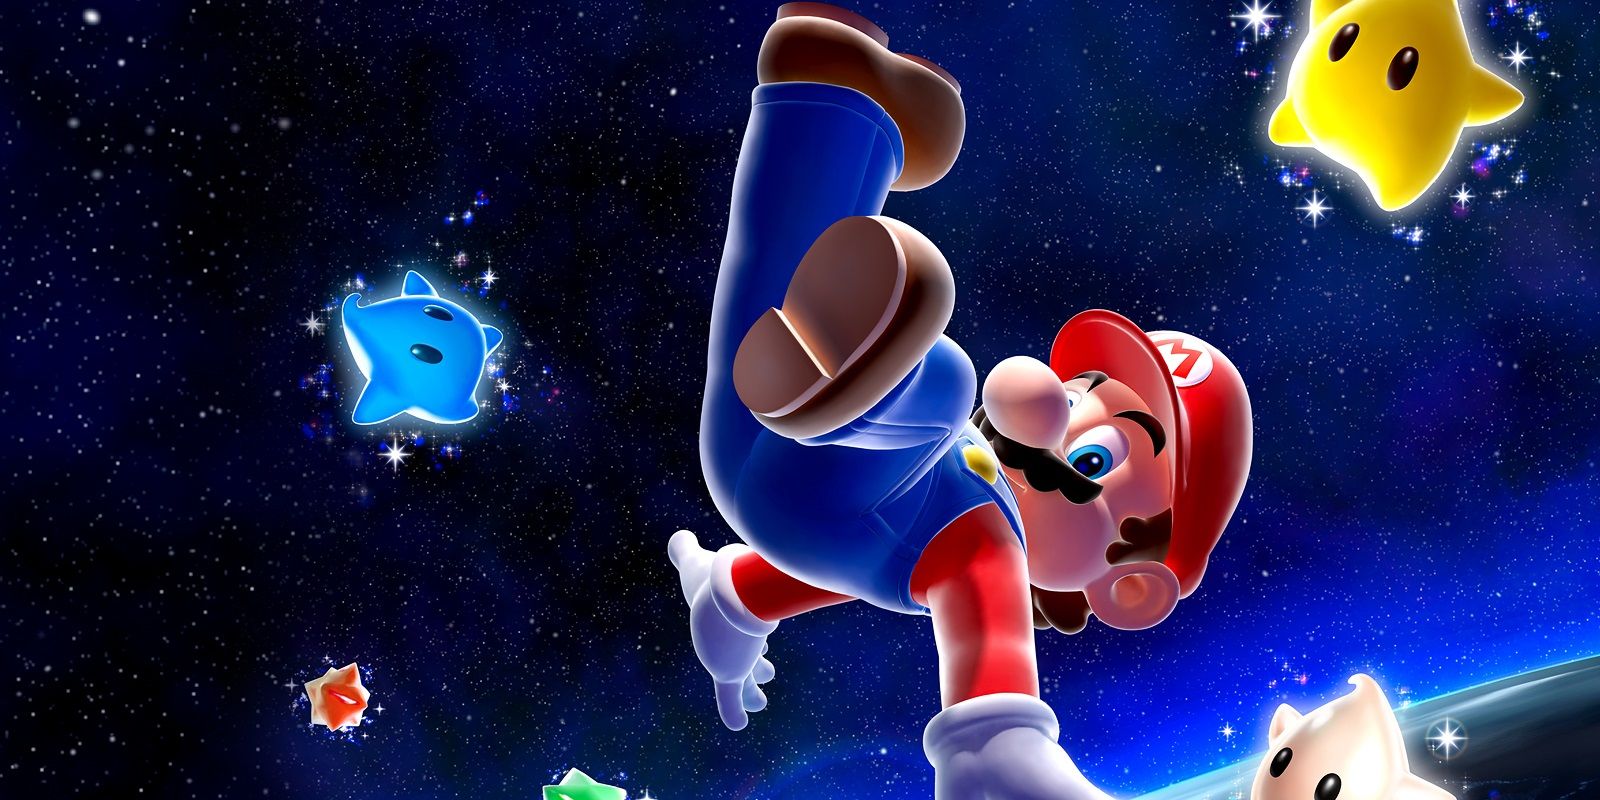 Mario upside down in space with stars in Super Mario Galaxy 